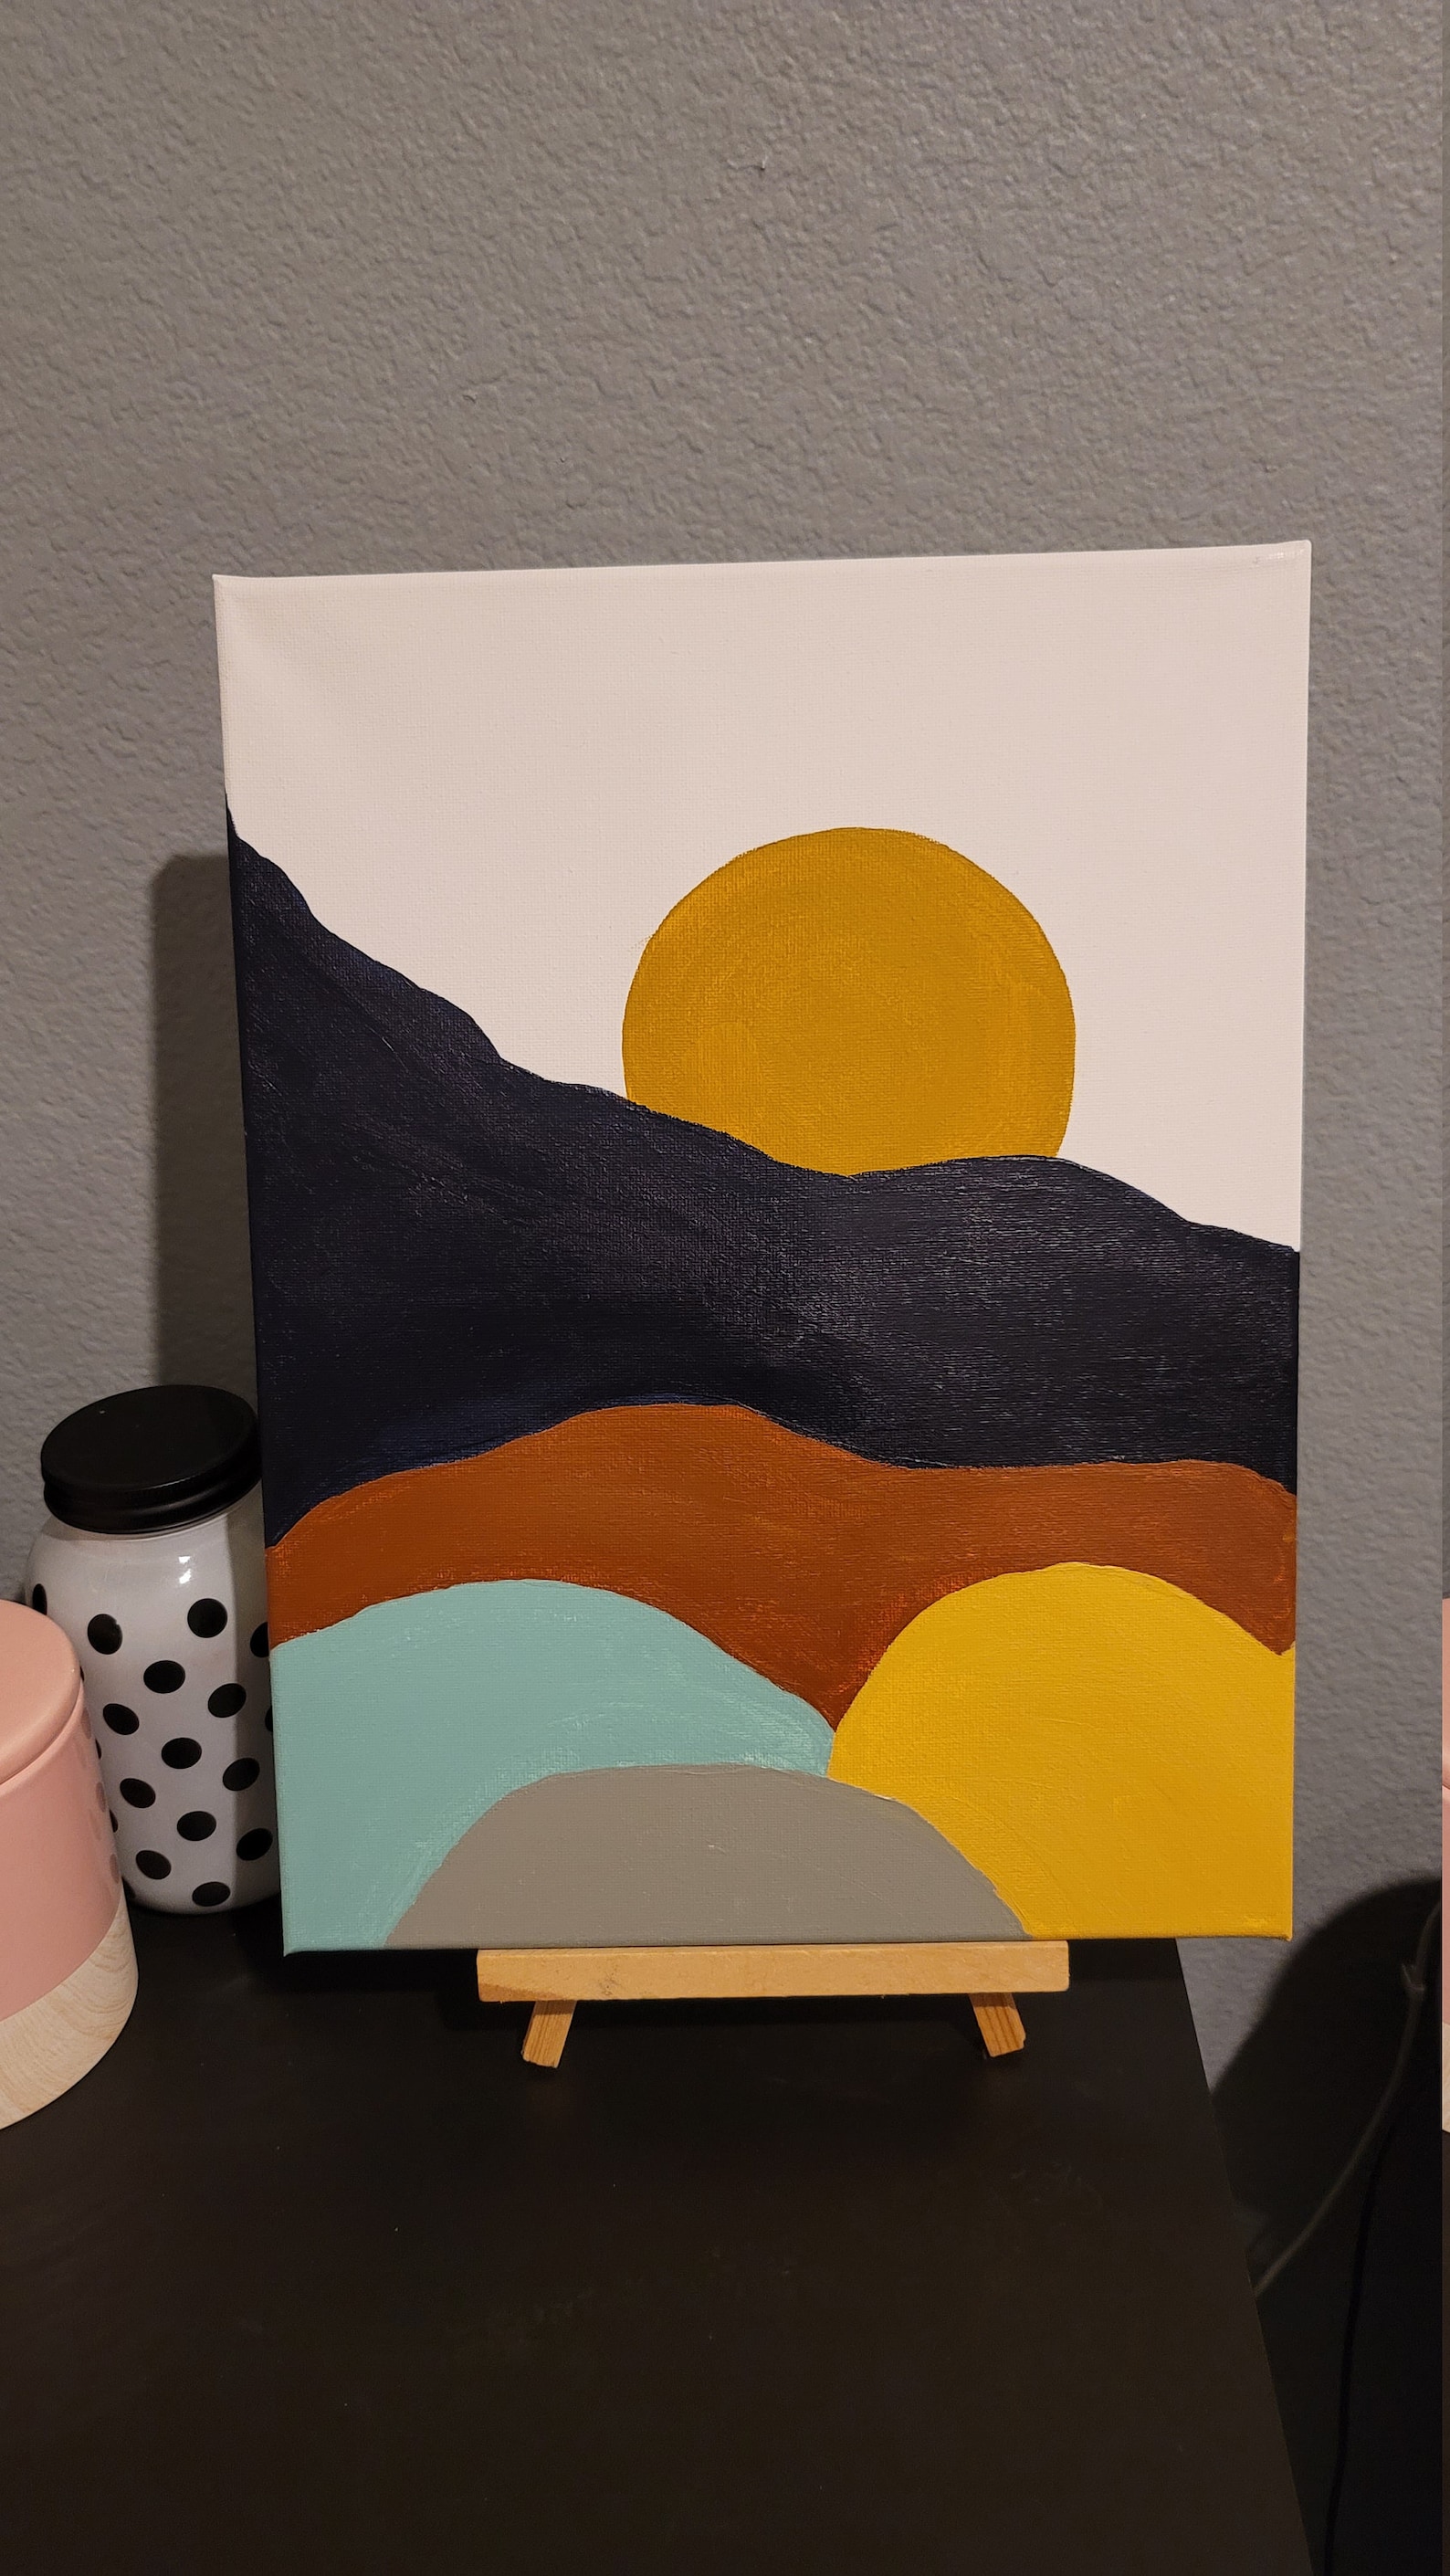 Acrylic painting of hills with sun coming out. | Etsy